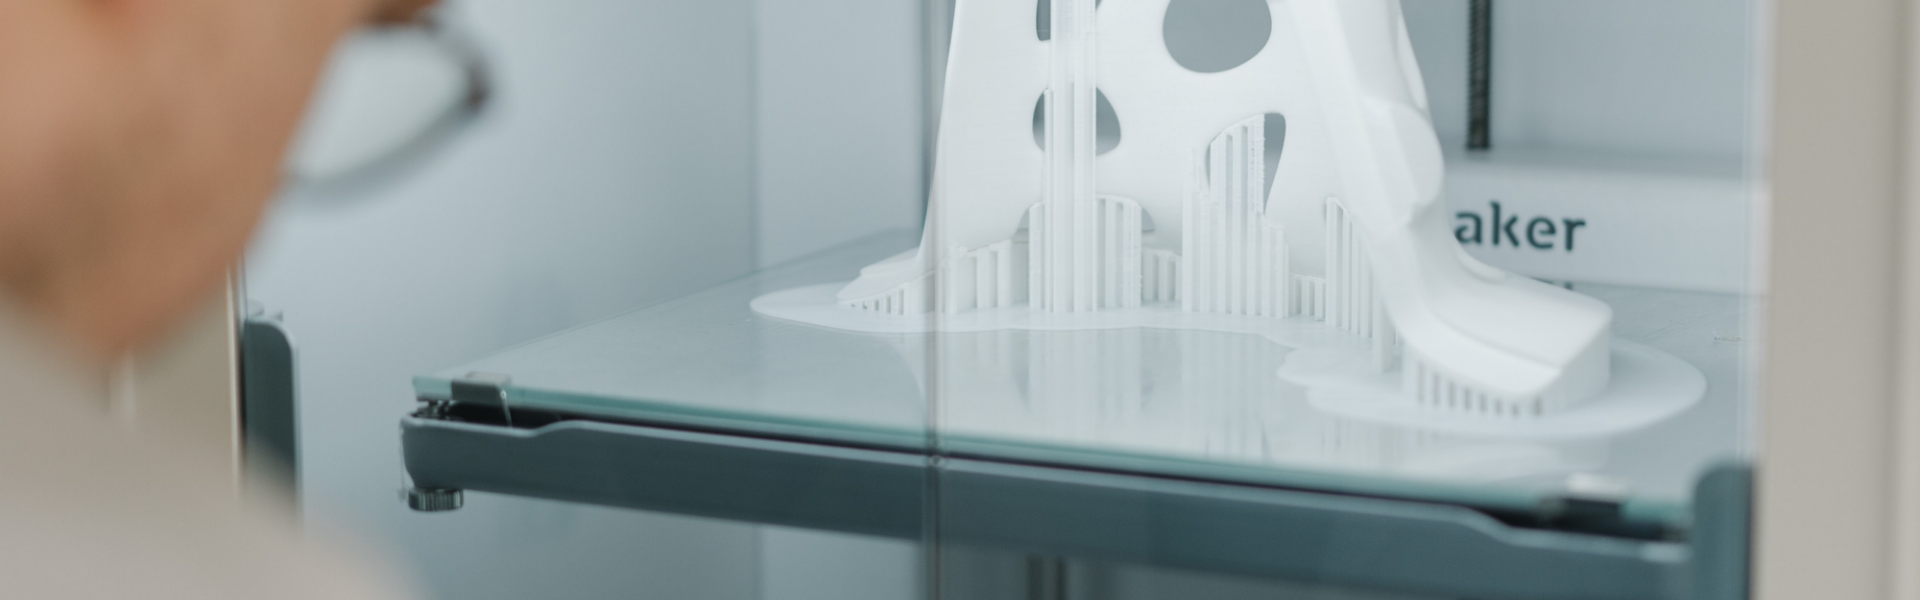 3D Printing is you premier for product development?